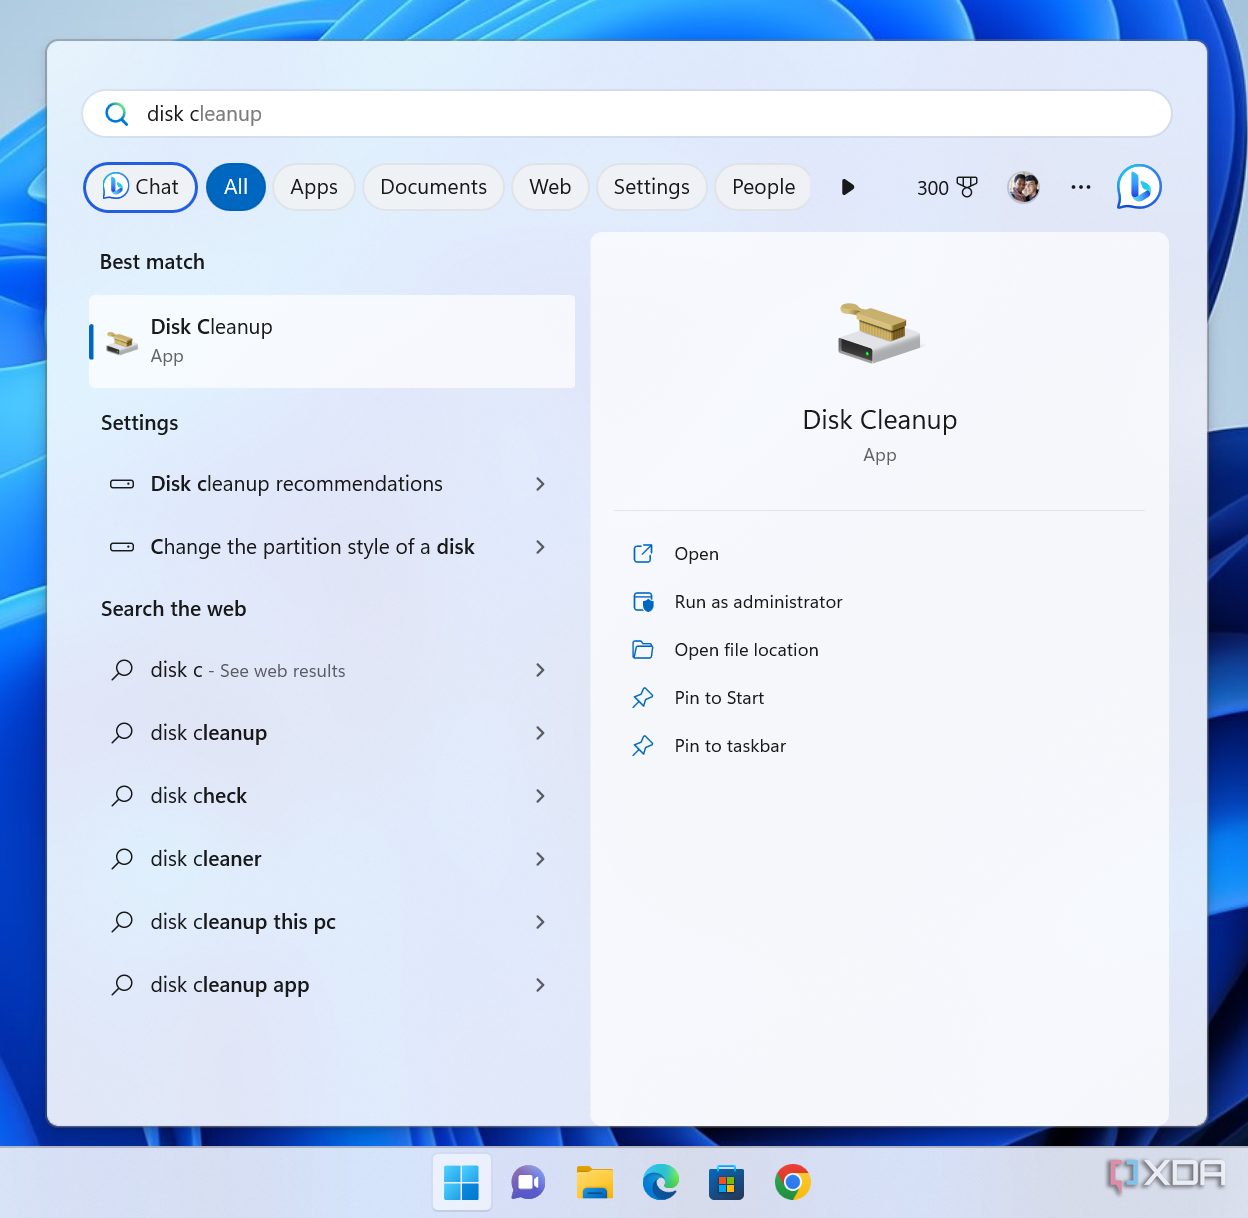 Screenshot of Windows 11 search results showing Disk cleanup as the top result